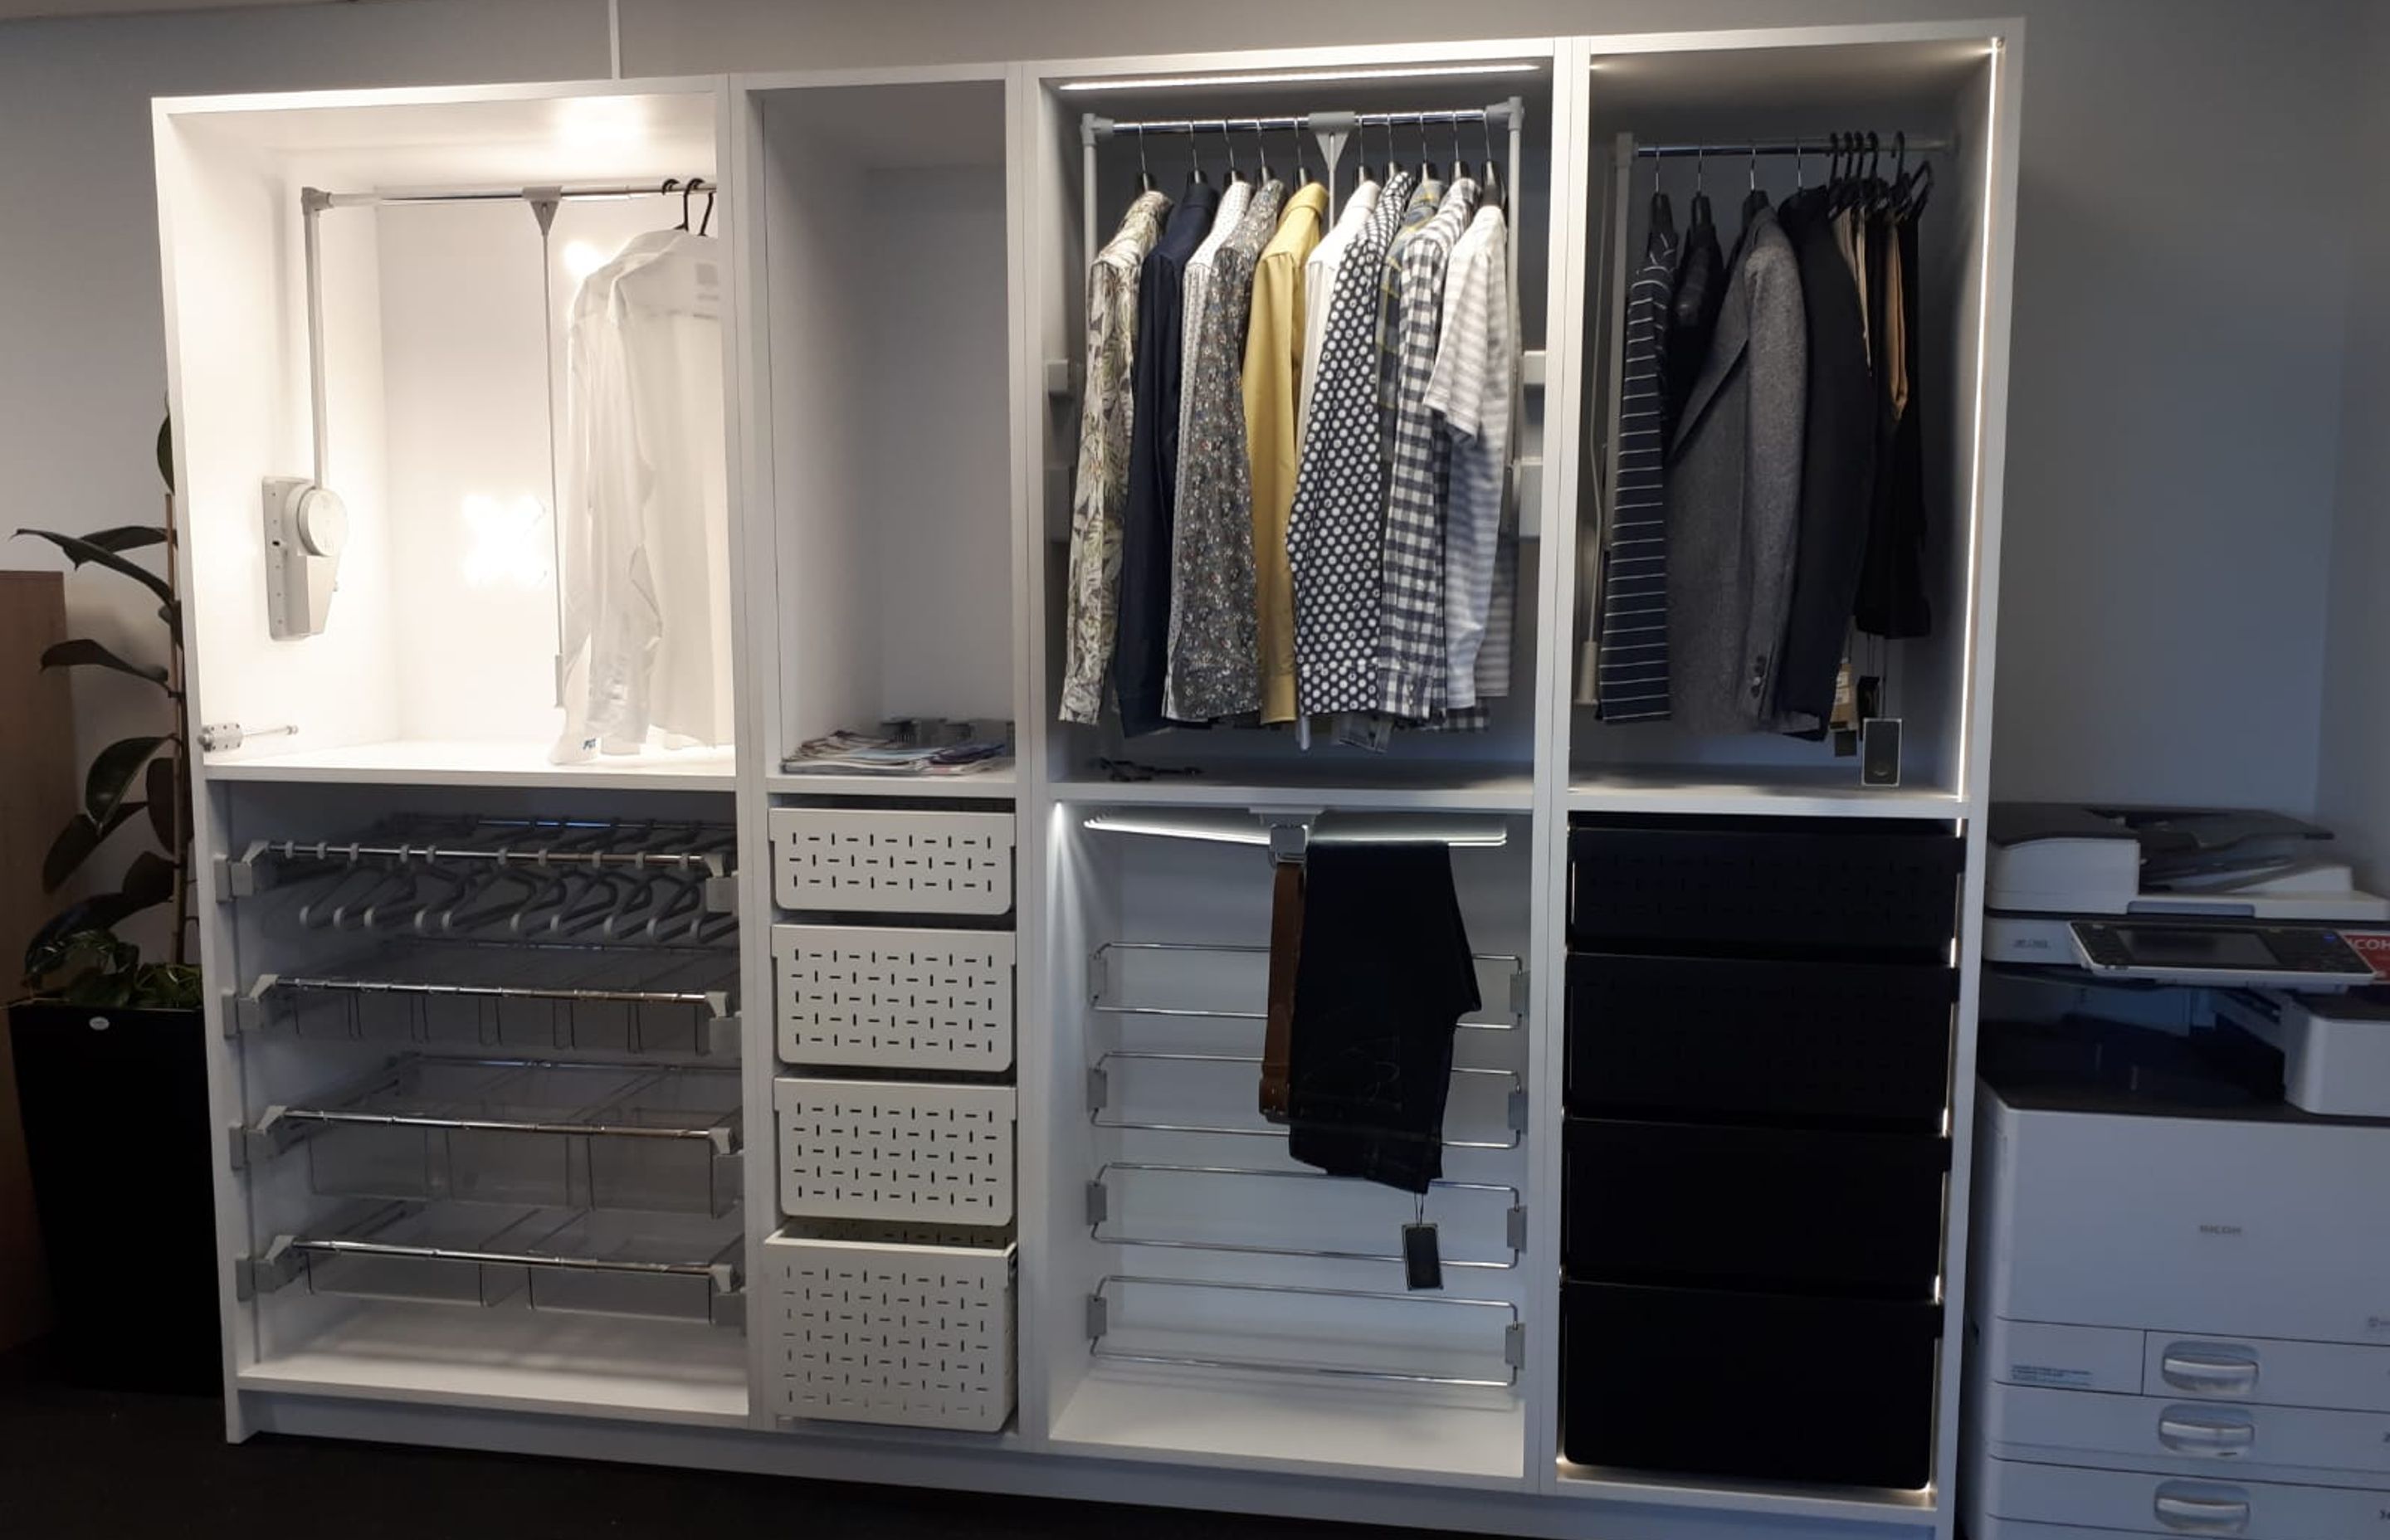 Fit Showroom Christchurch - Ambos Wardrobe Systems and Tanova Ventilated Drawers